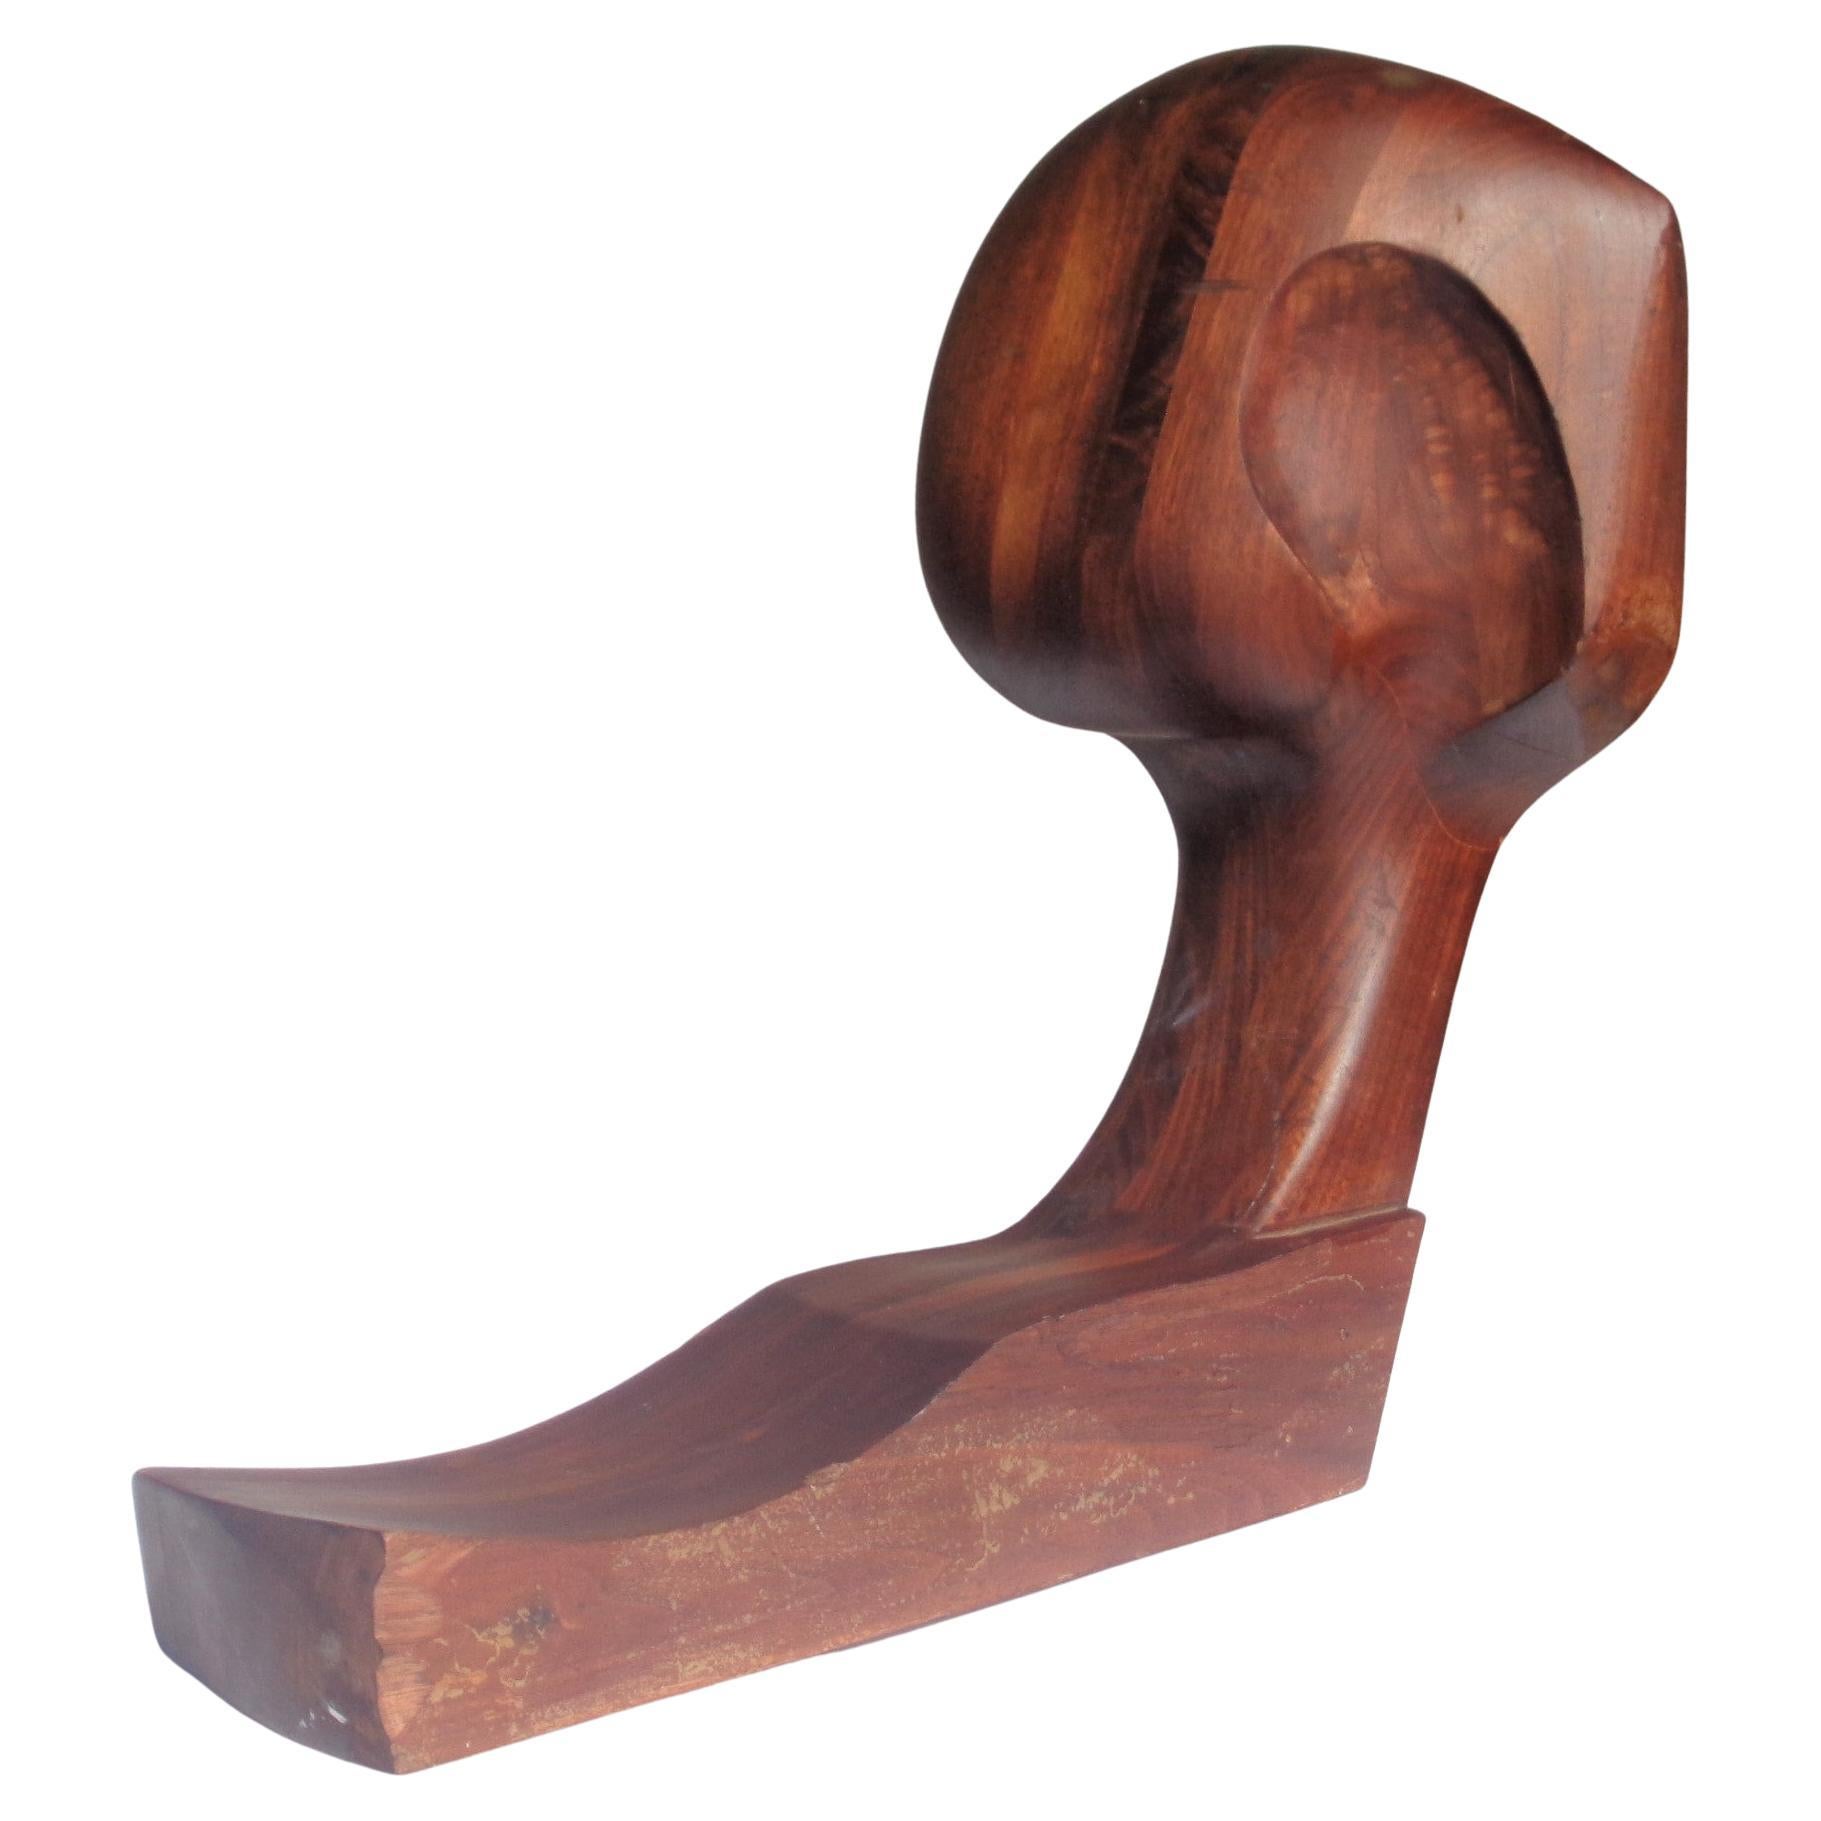 American studio craft movement abstract modernist wood sculpture bust figure w/ hand crafted, hand carved, stack laminated construction w/ beautifully aged surface color. Attributed to American artist sculptor Margery Goldberg ( b. 1950 ) founder of